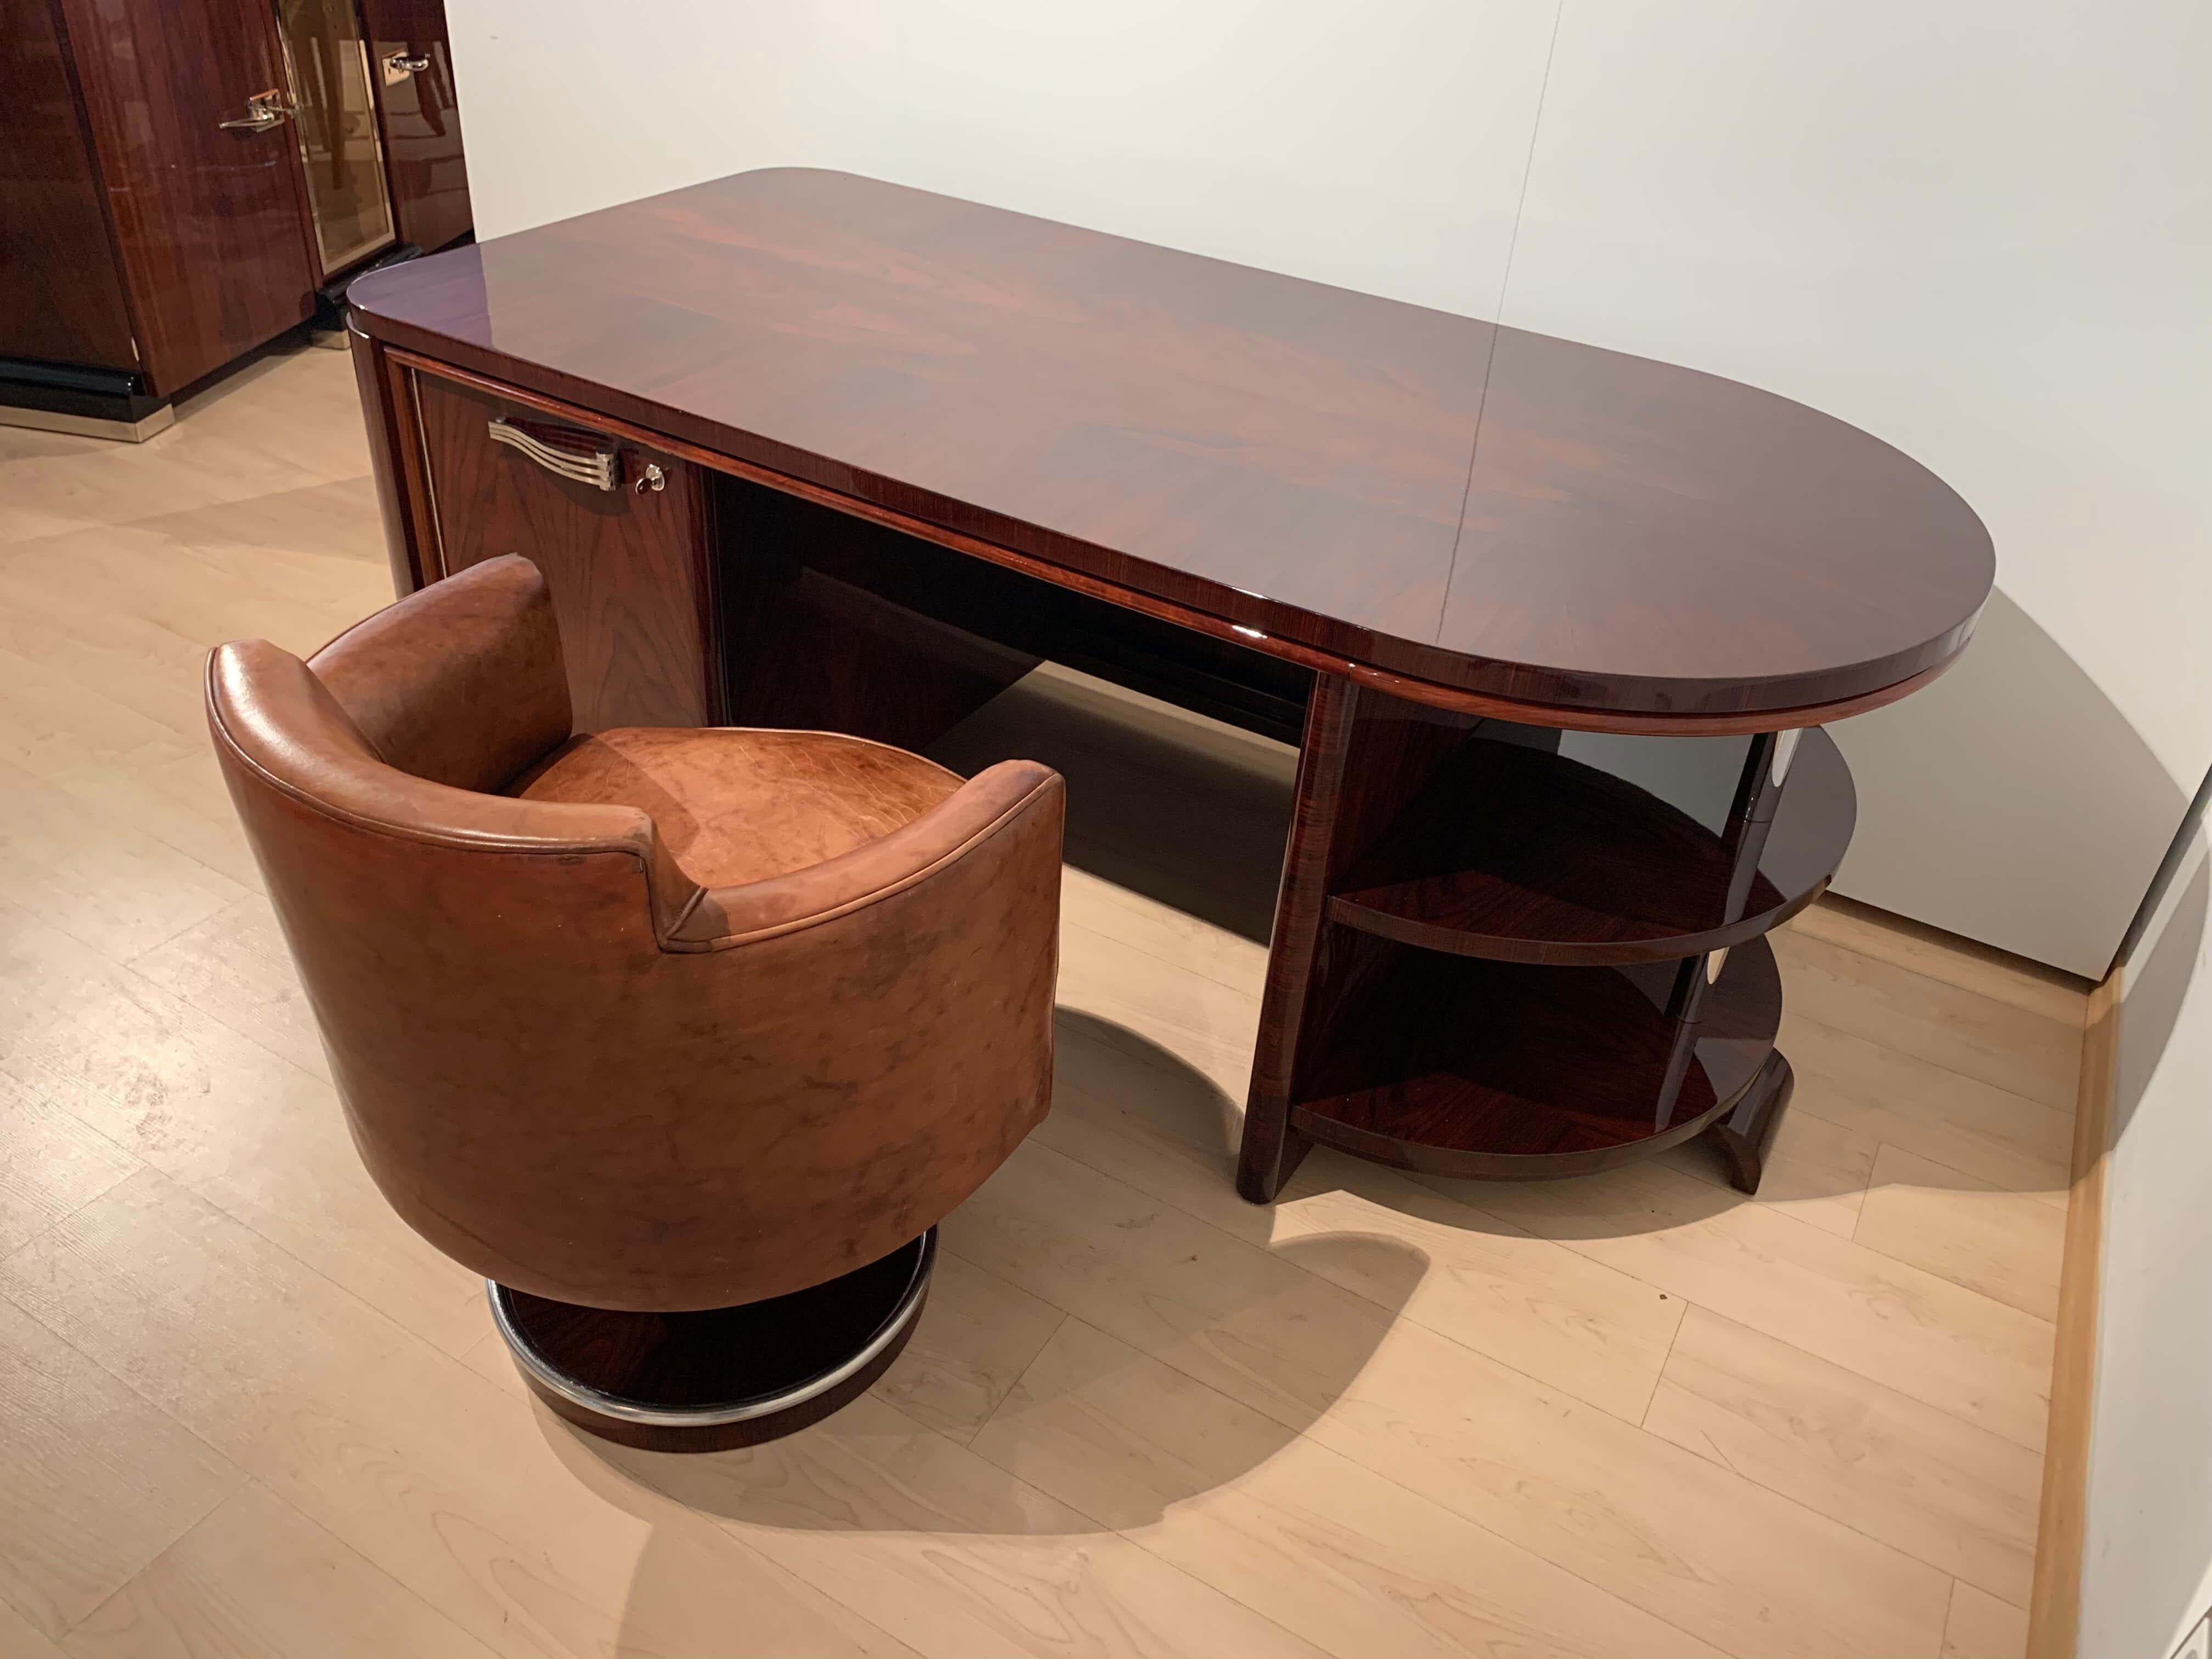 French Art Deco Rosewood Desk with Leather Chair, France, 1930s For Sale